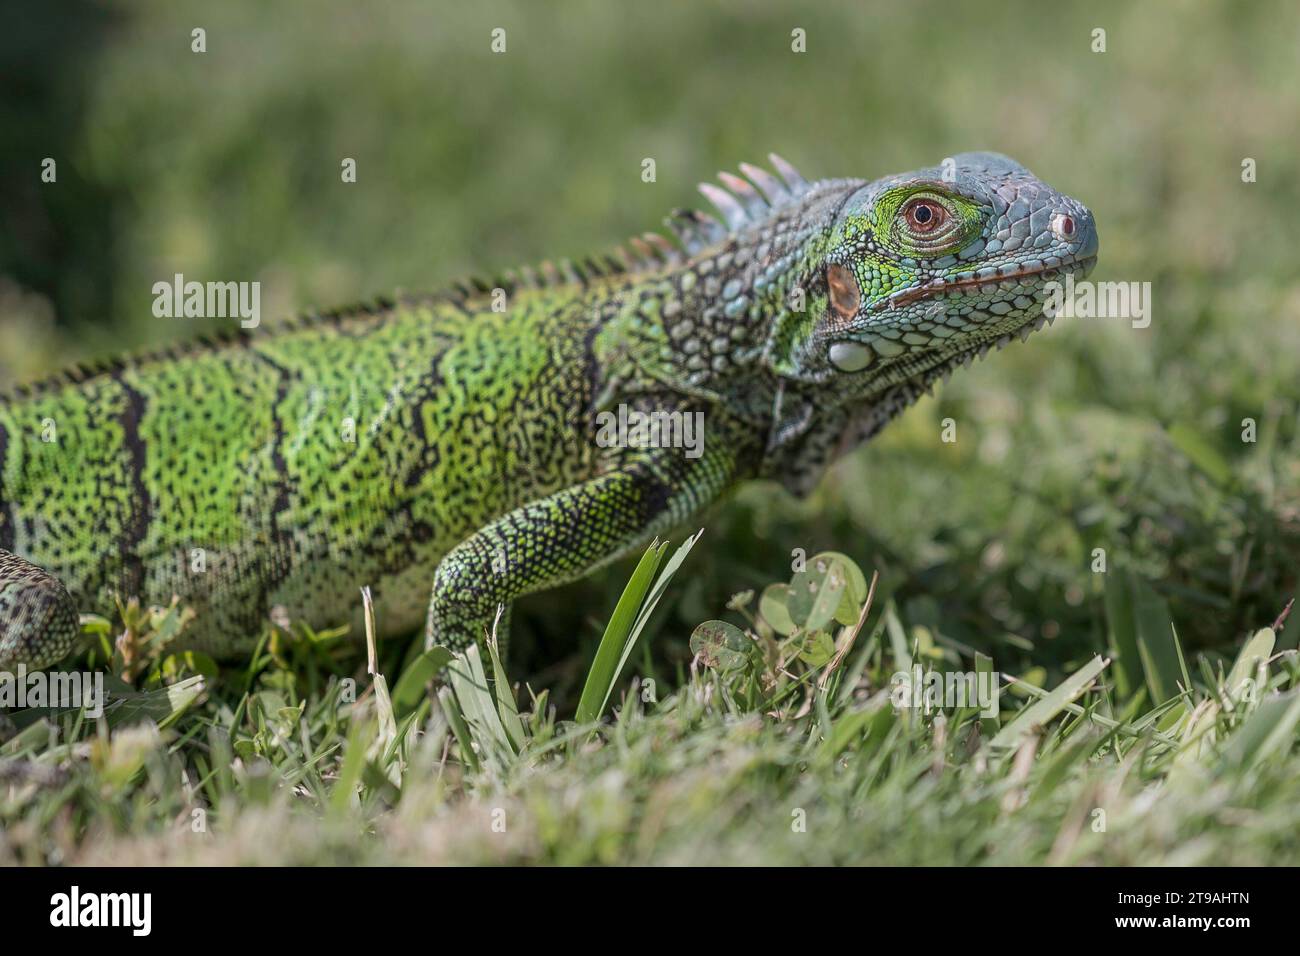 Close up of an Iguana, on a patch of grass. Focus on the eye. Stock Photo